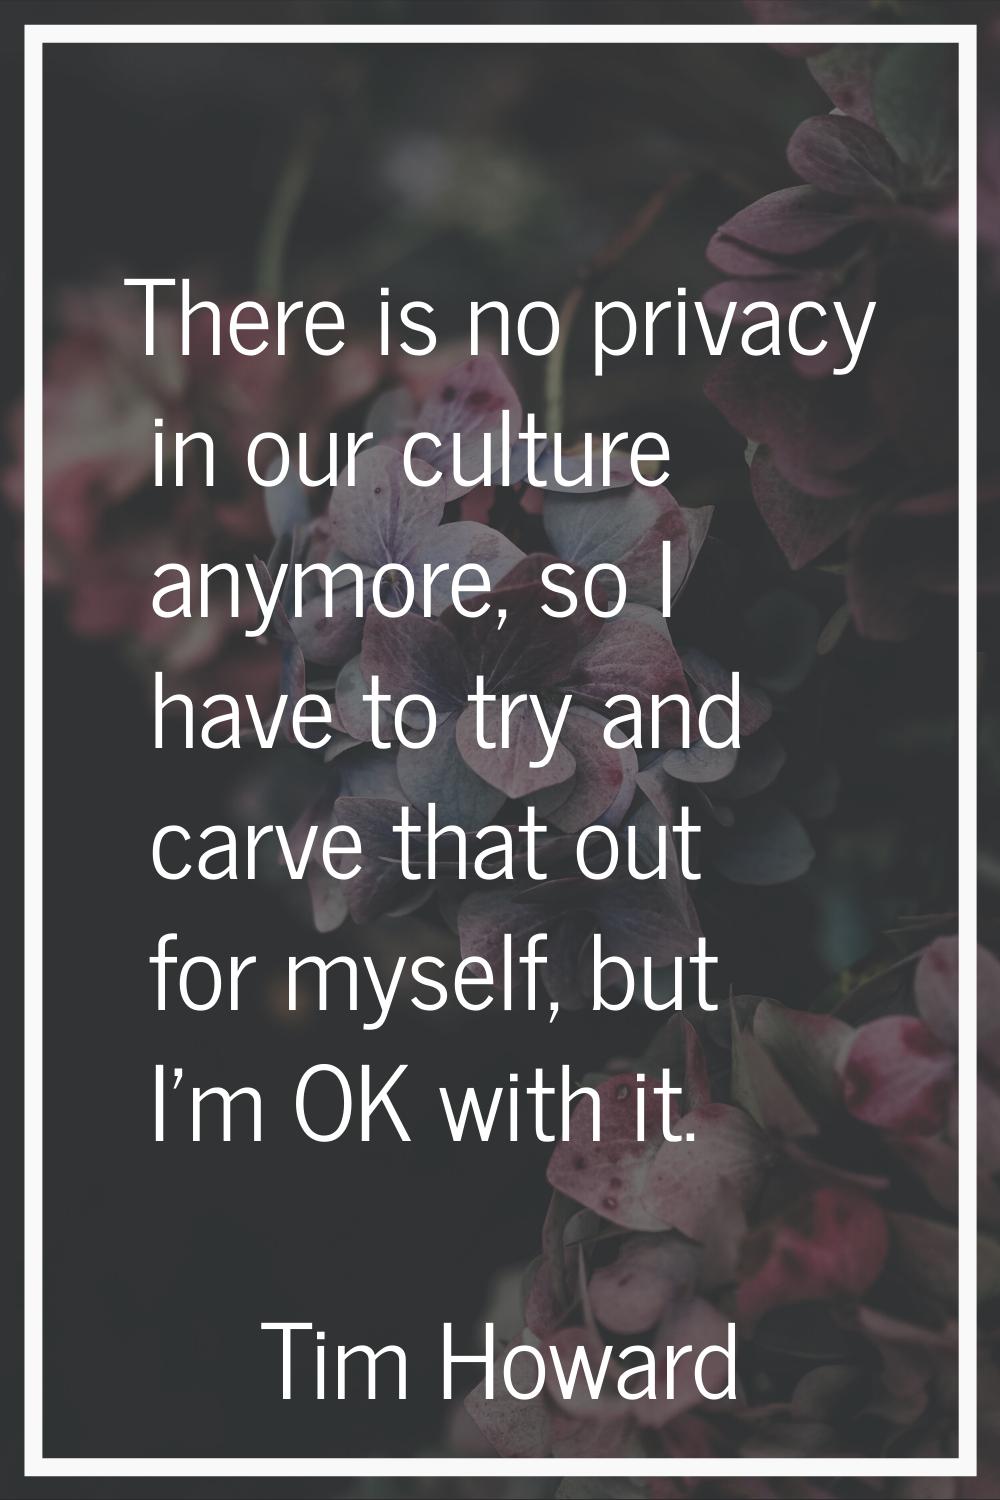 There is no privacy in our culture anymore, so I have to try and carve that out for myself, but I'm